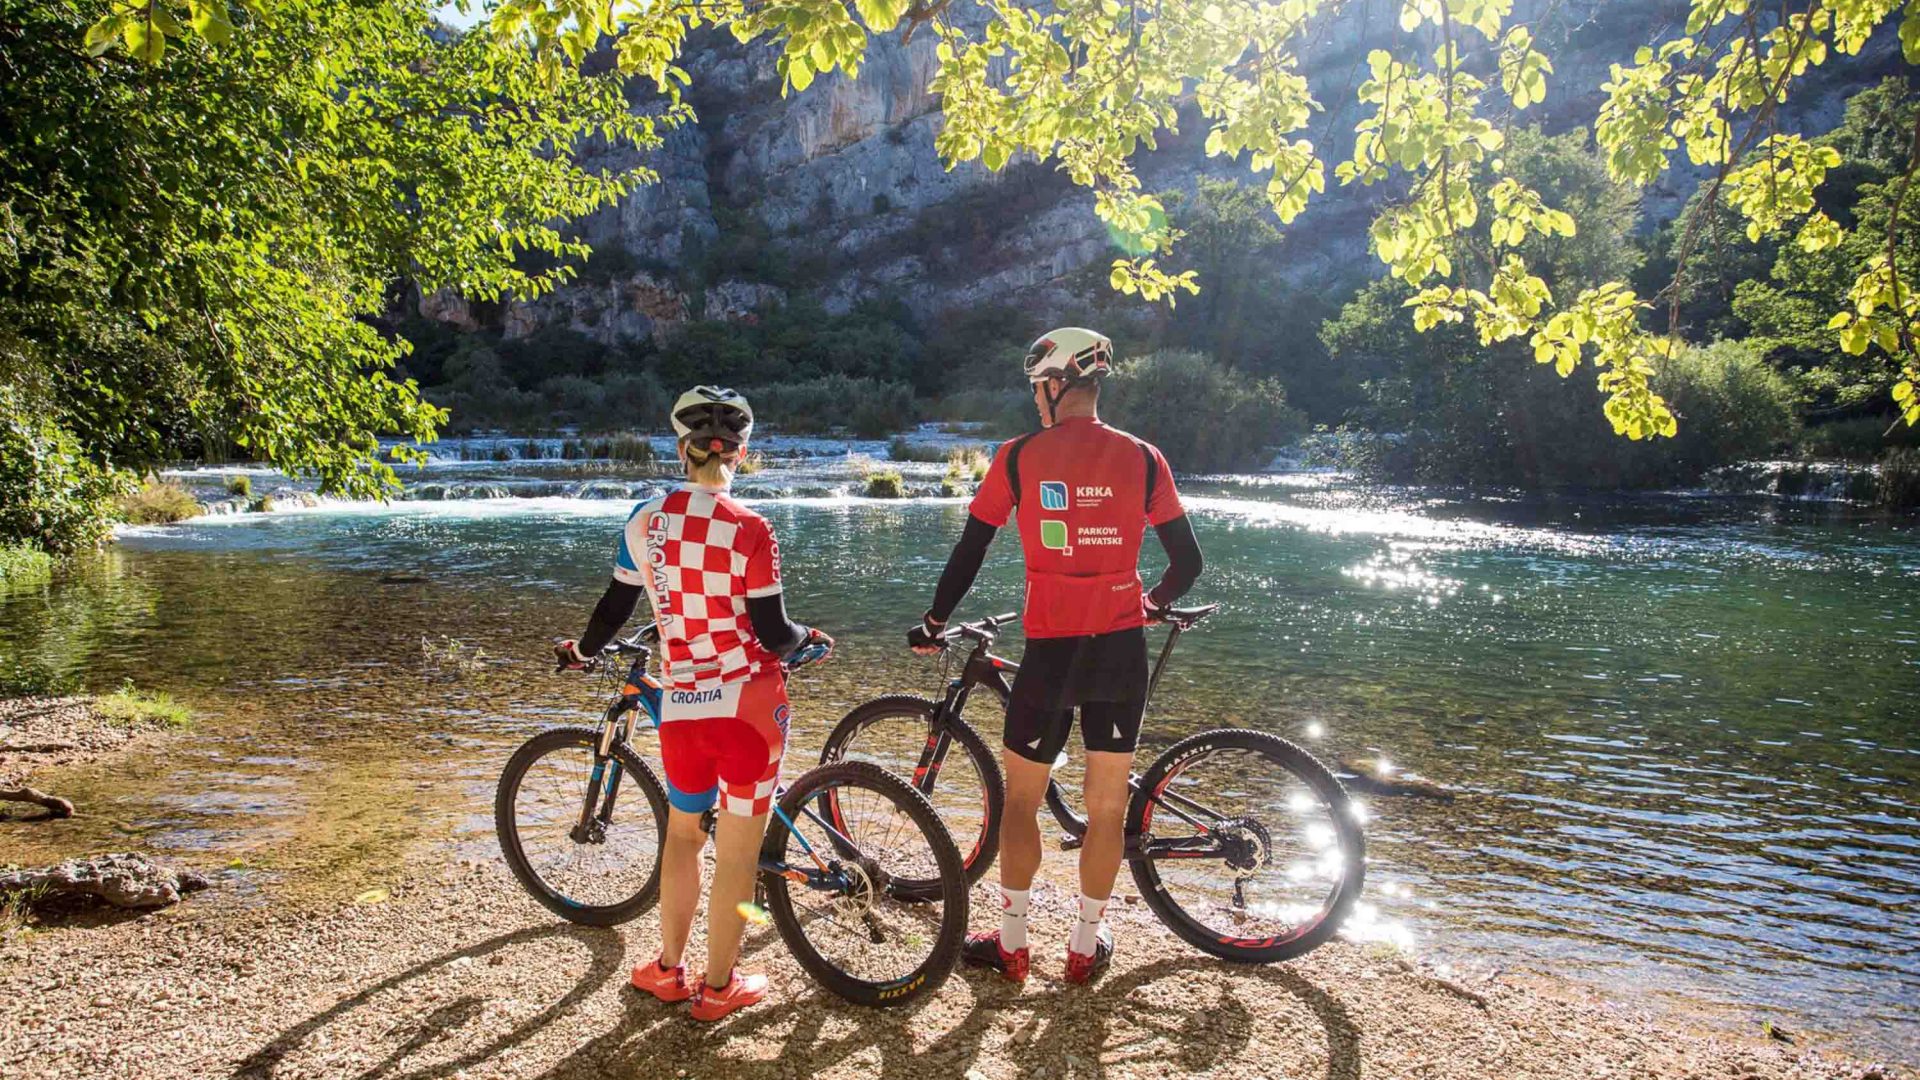 People who have been bike riding in Krka National Park pause to enjoy a view of a waterfall.